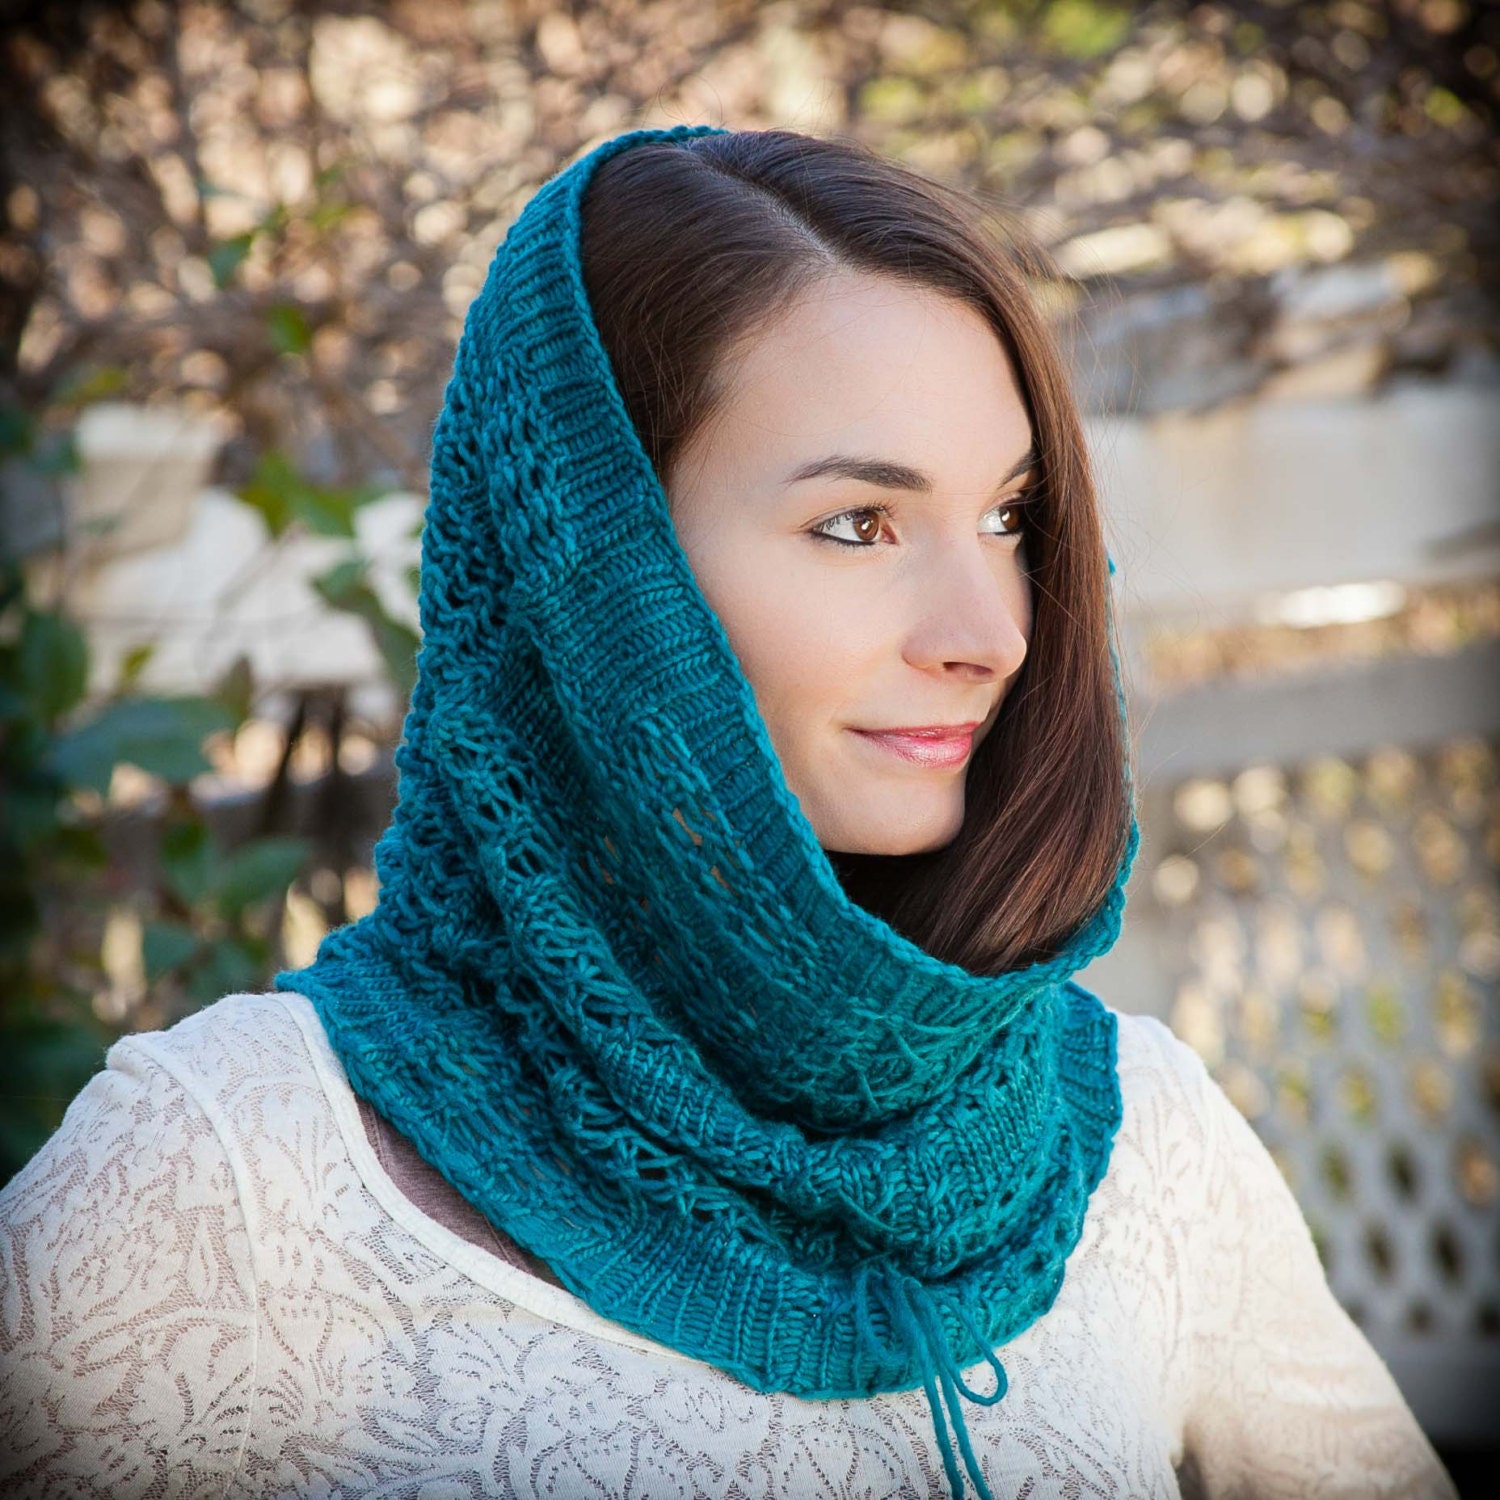 Loom Knit Lace Shawl, Snood, Cowl, Scarf, Table Runner Patterns